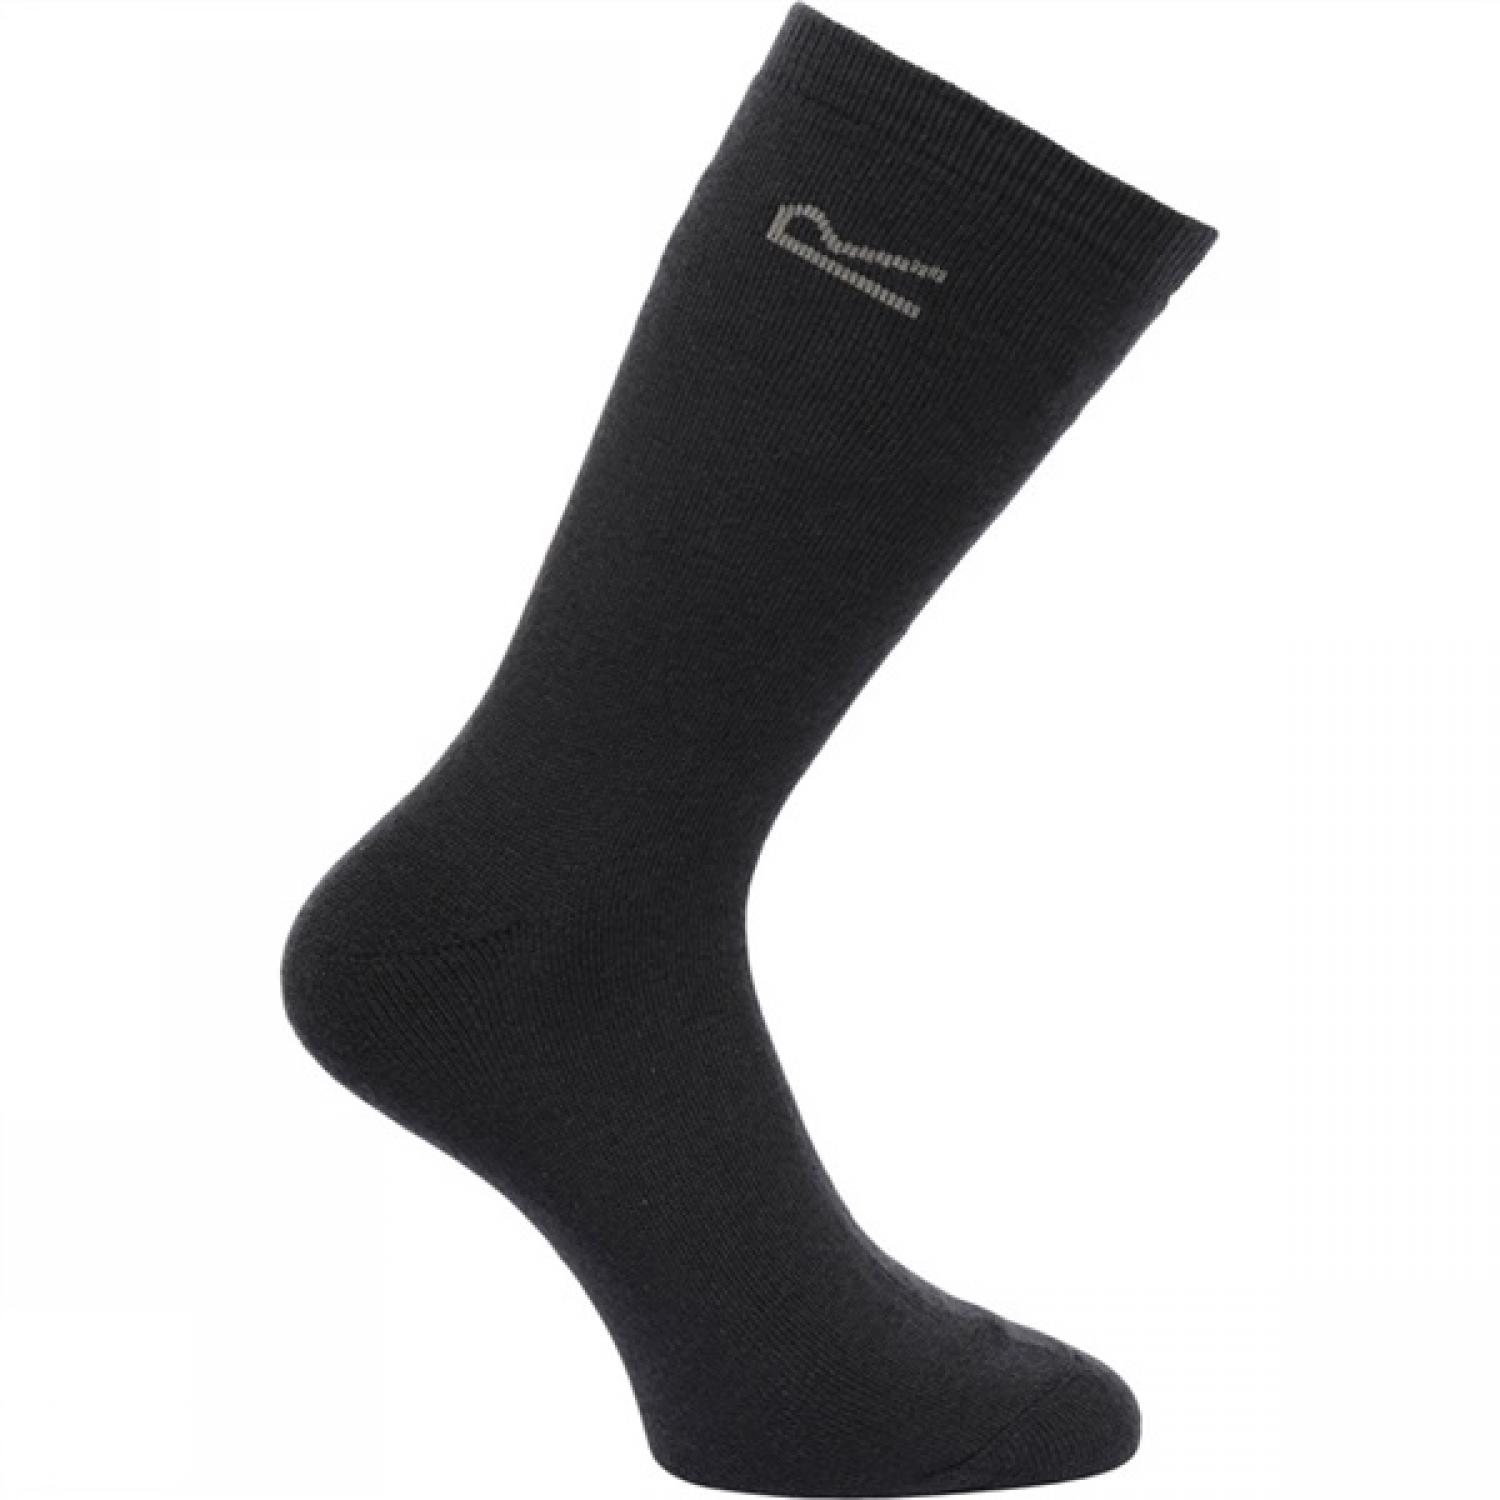 Buy Regatta Thermal Navy Socks Pack of 5 from Fane Valley Stores ...